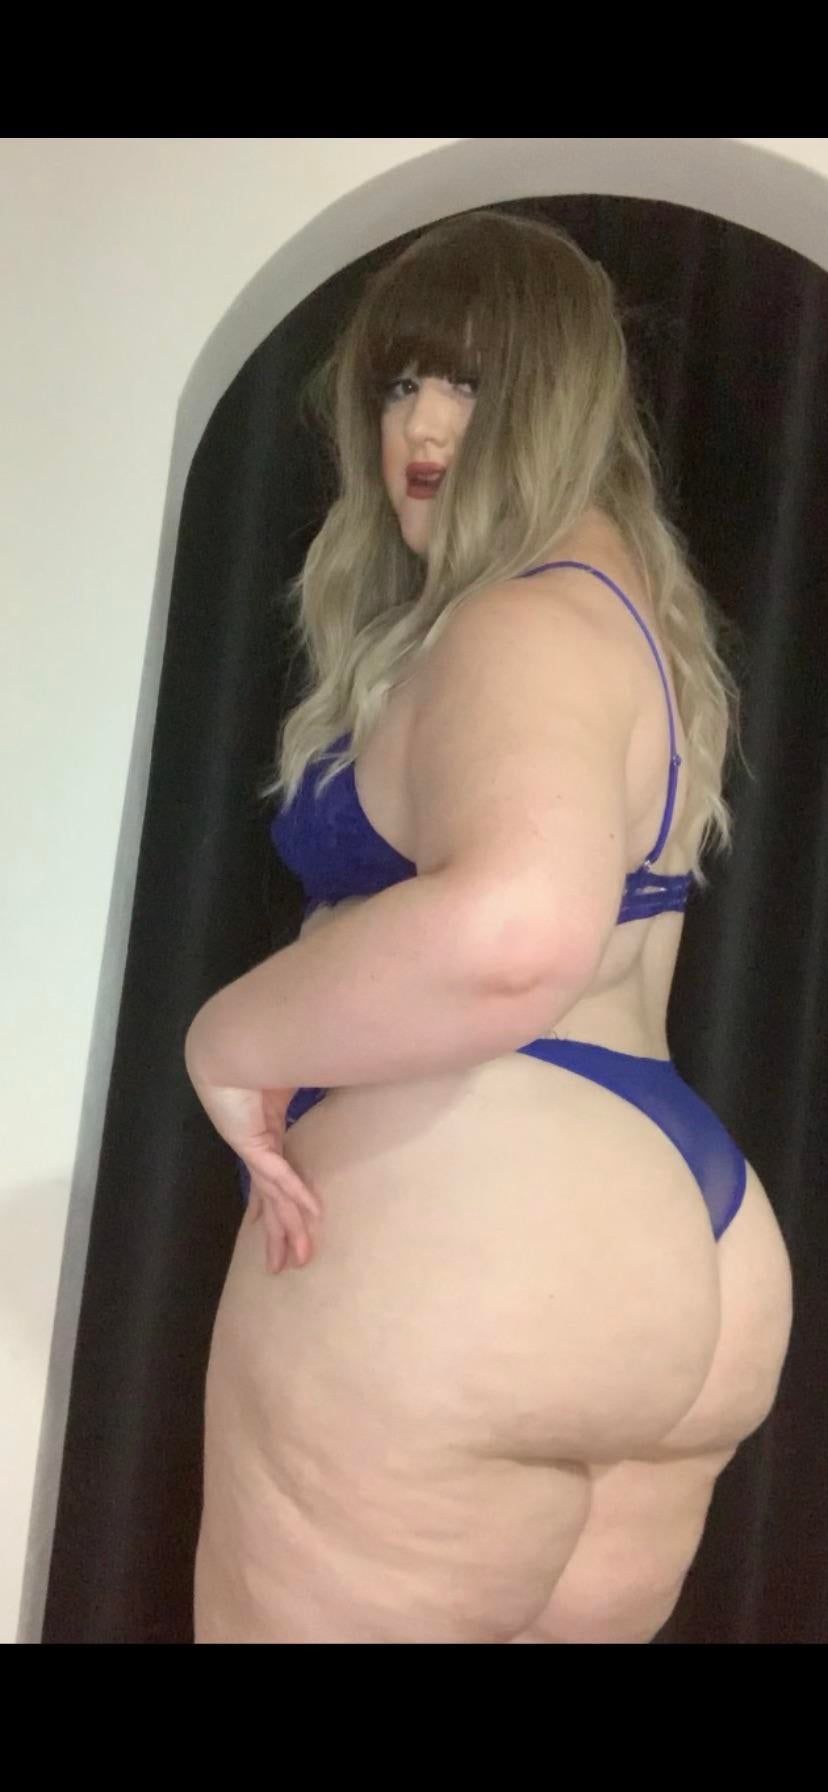 Thick thighs in blue lingerie Thick White Girls